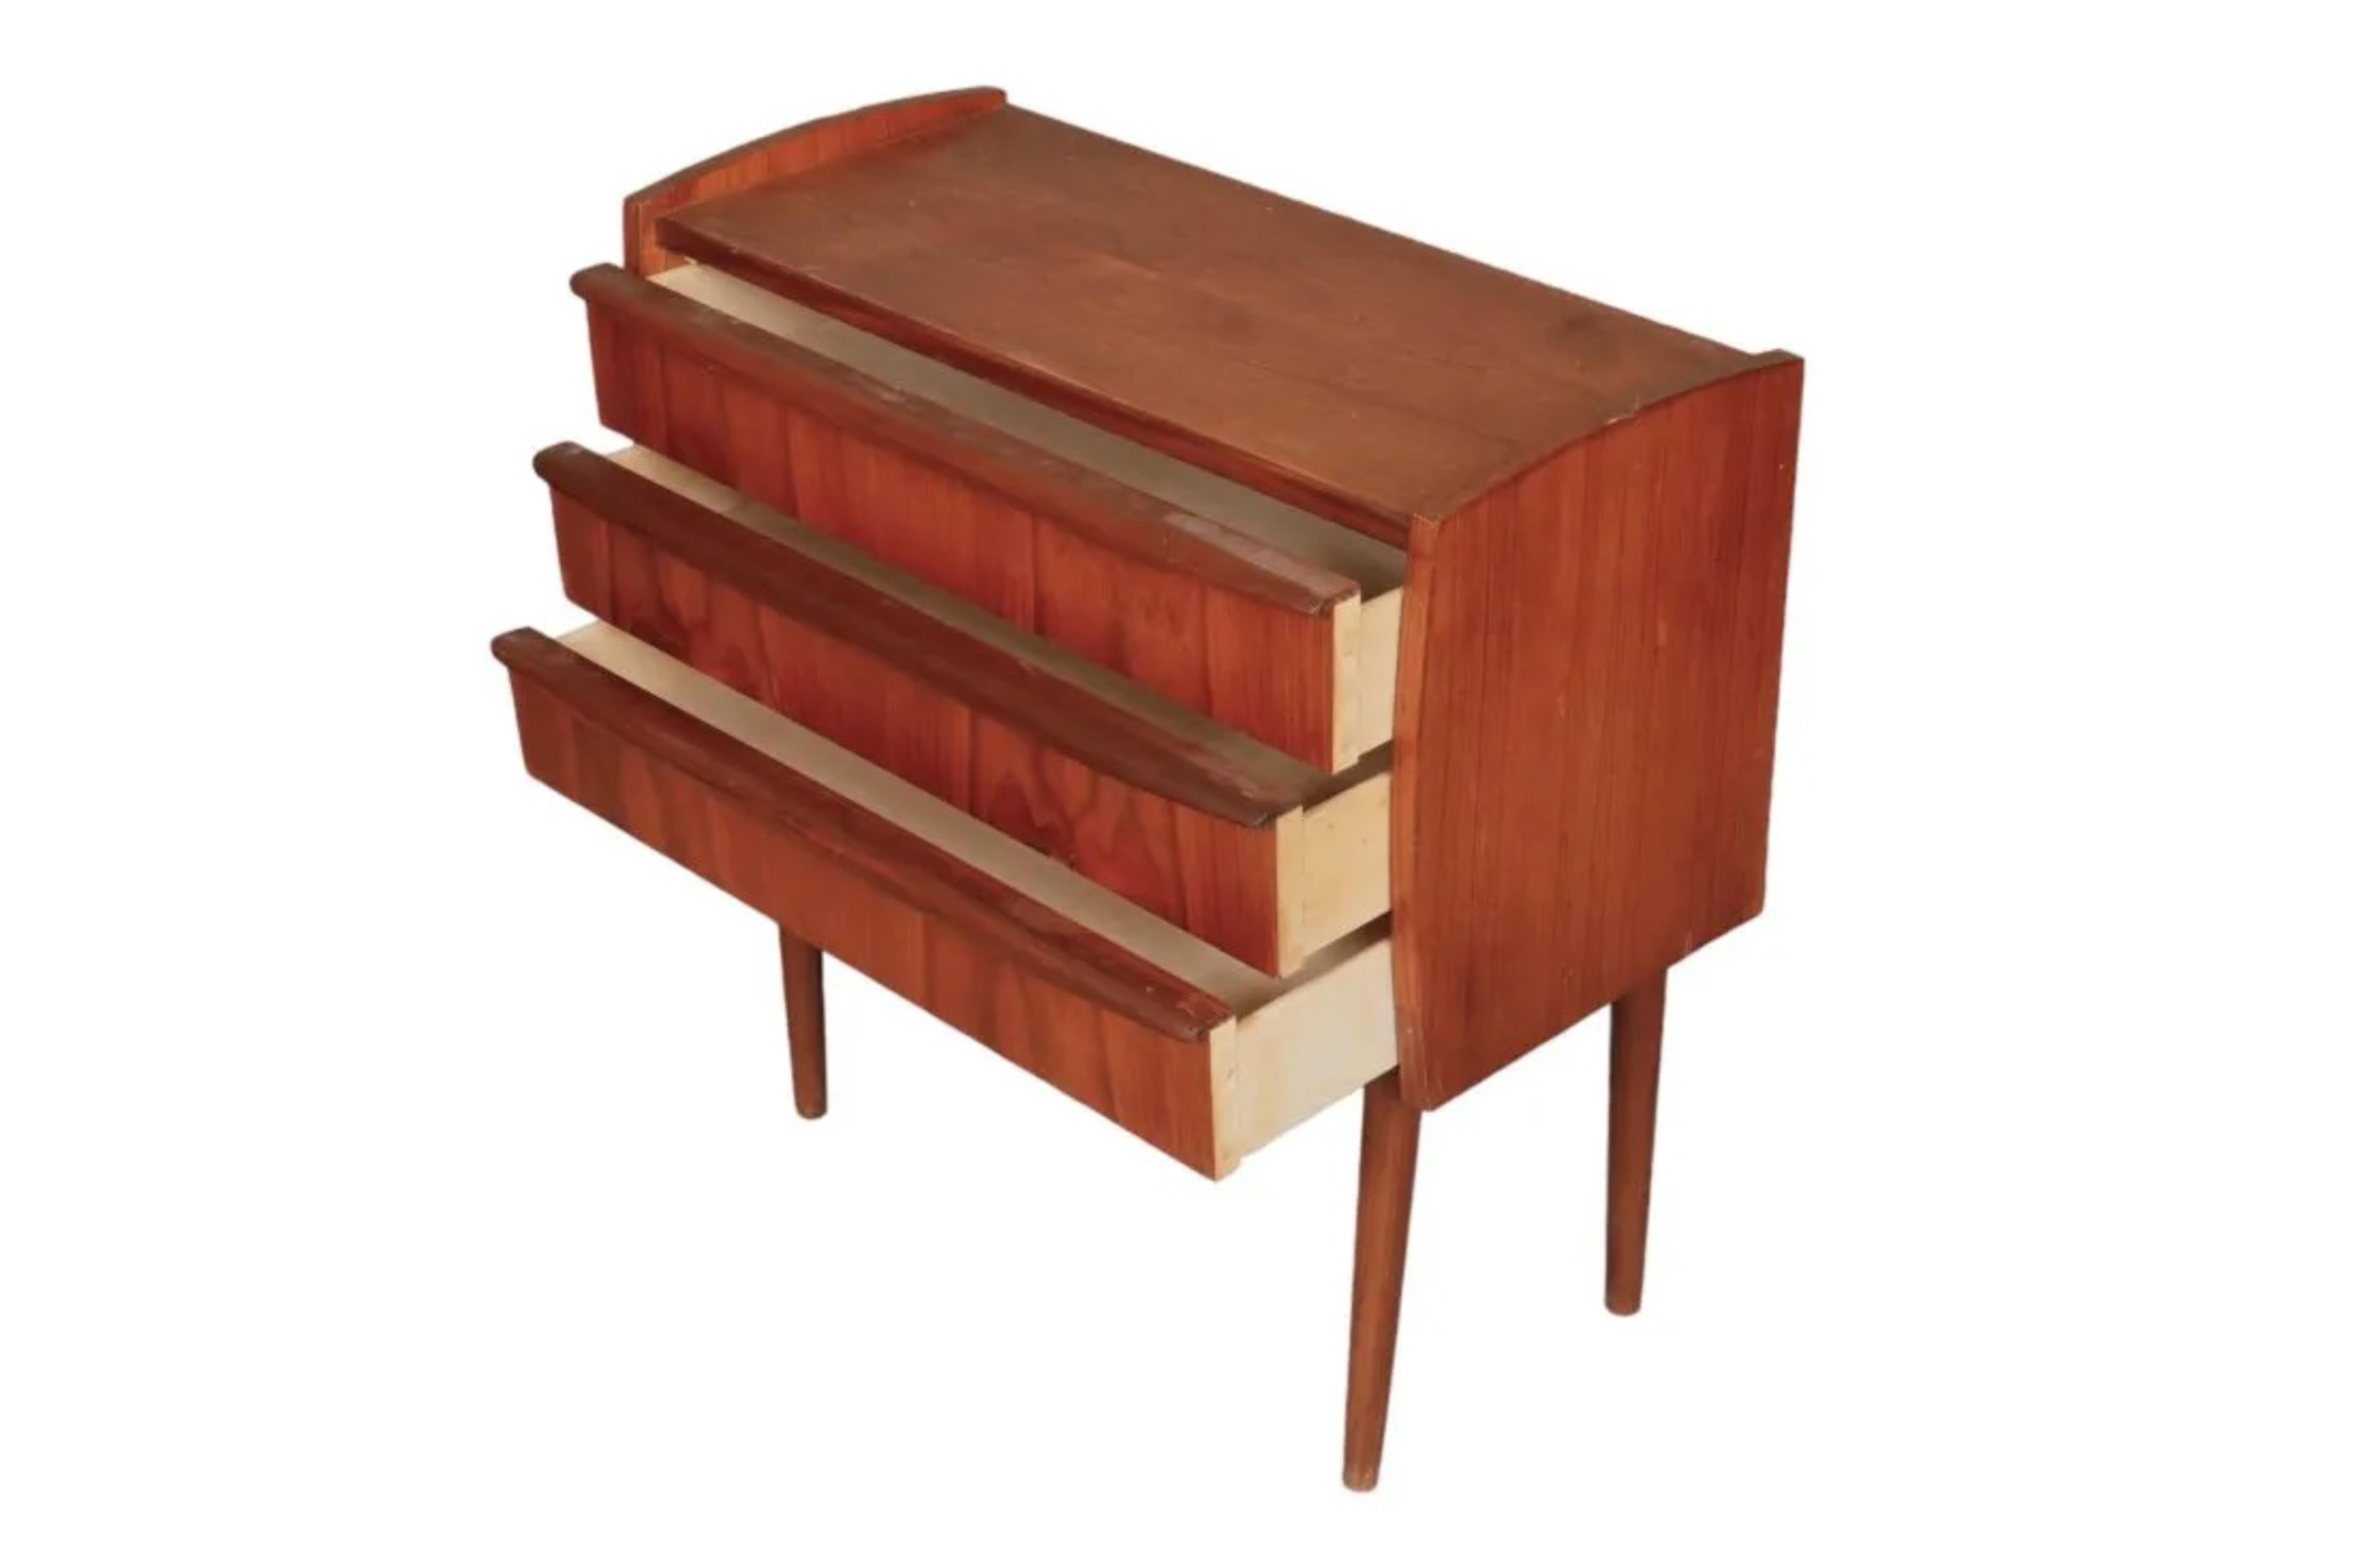 Mid-Century Teak Dresser with 3 drawers 
Dimensions:
Width26 in. Depth--12in Height26 in.
Very good Condition considering Use & Age
